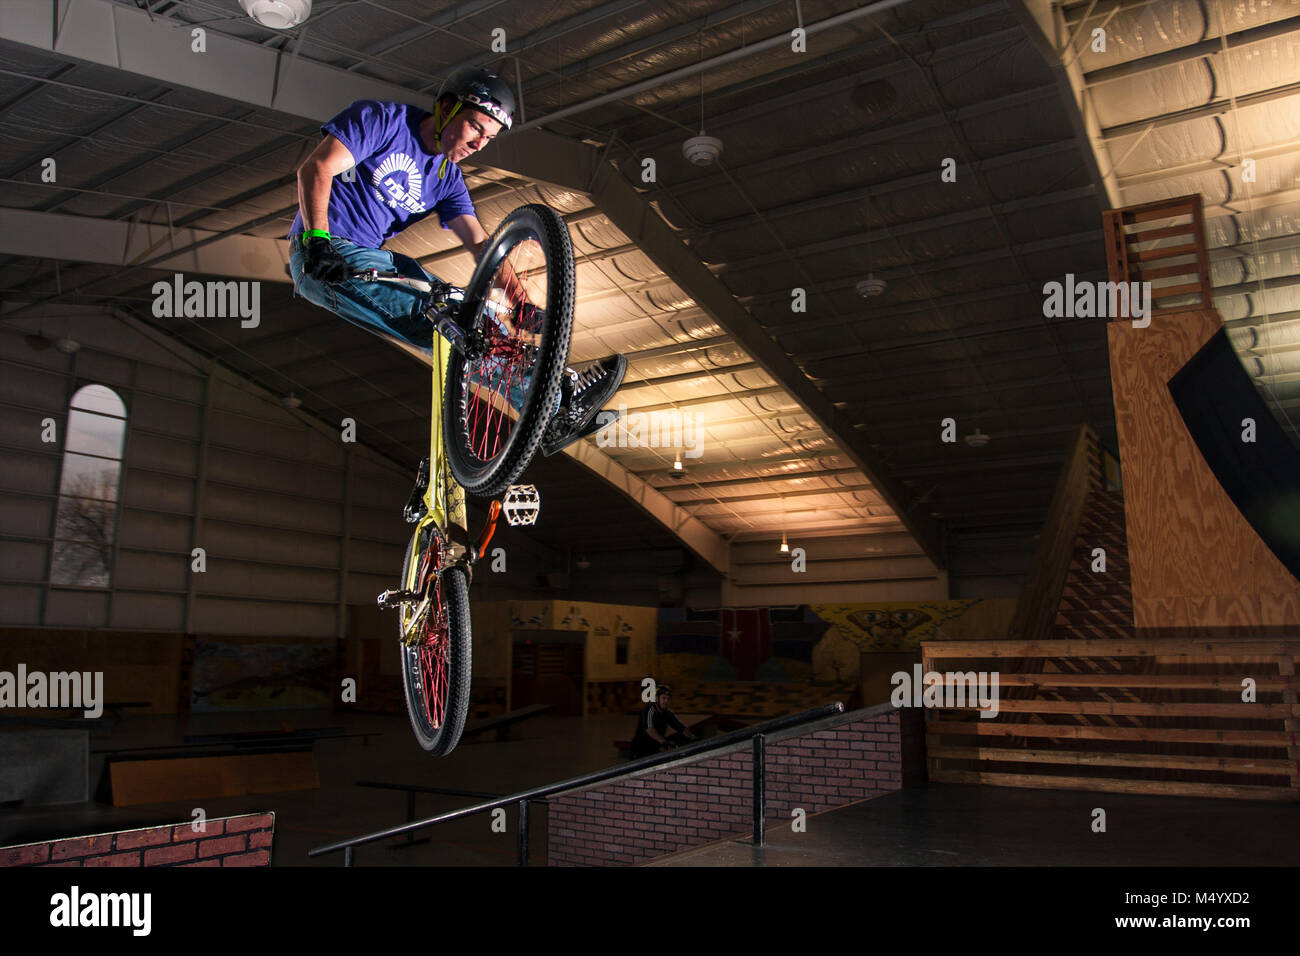 Mountain biker doing no footed Can Can in skate park, Tehachapi, California, USA Stock Photo